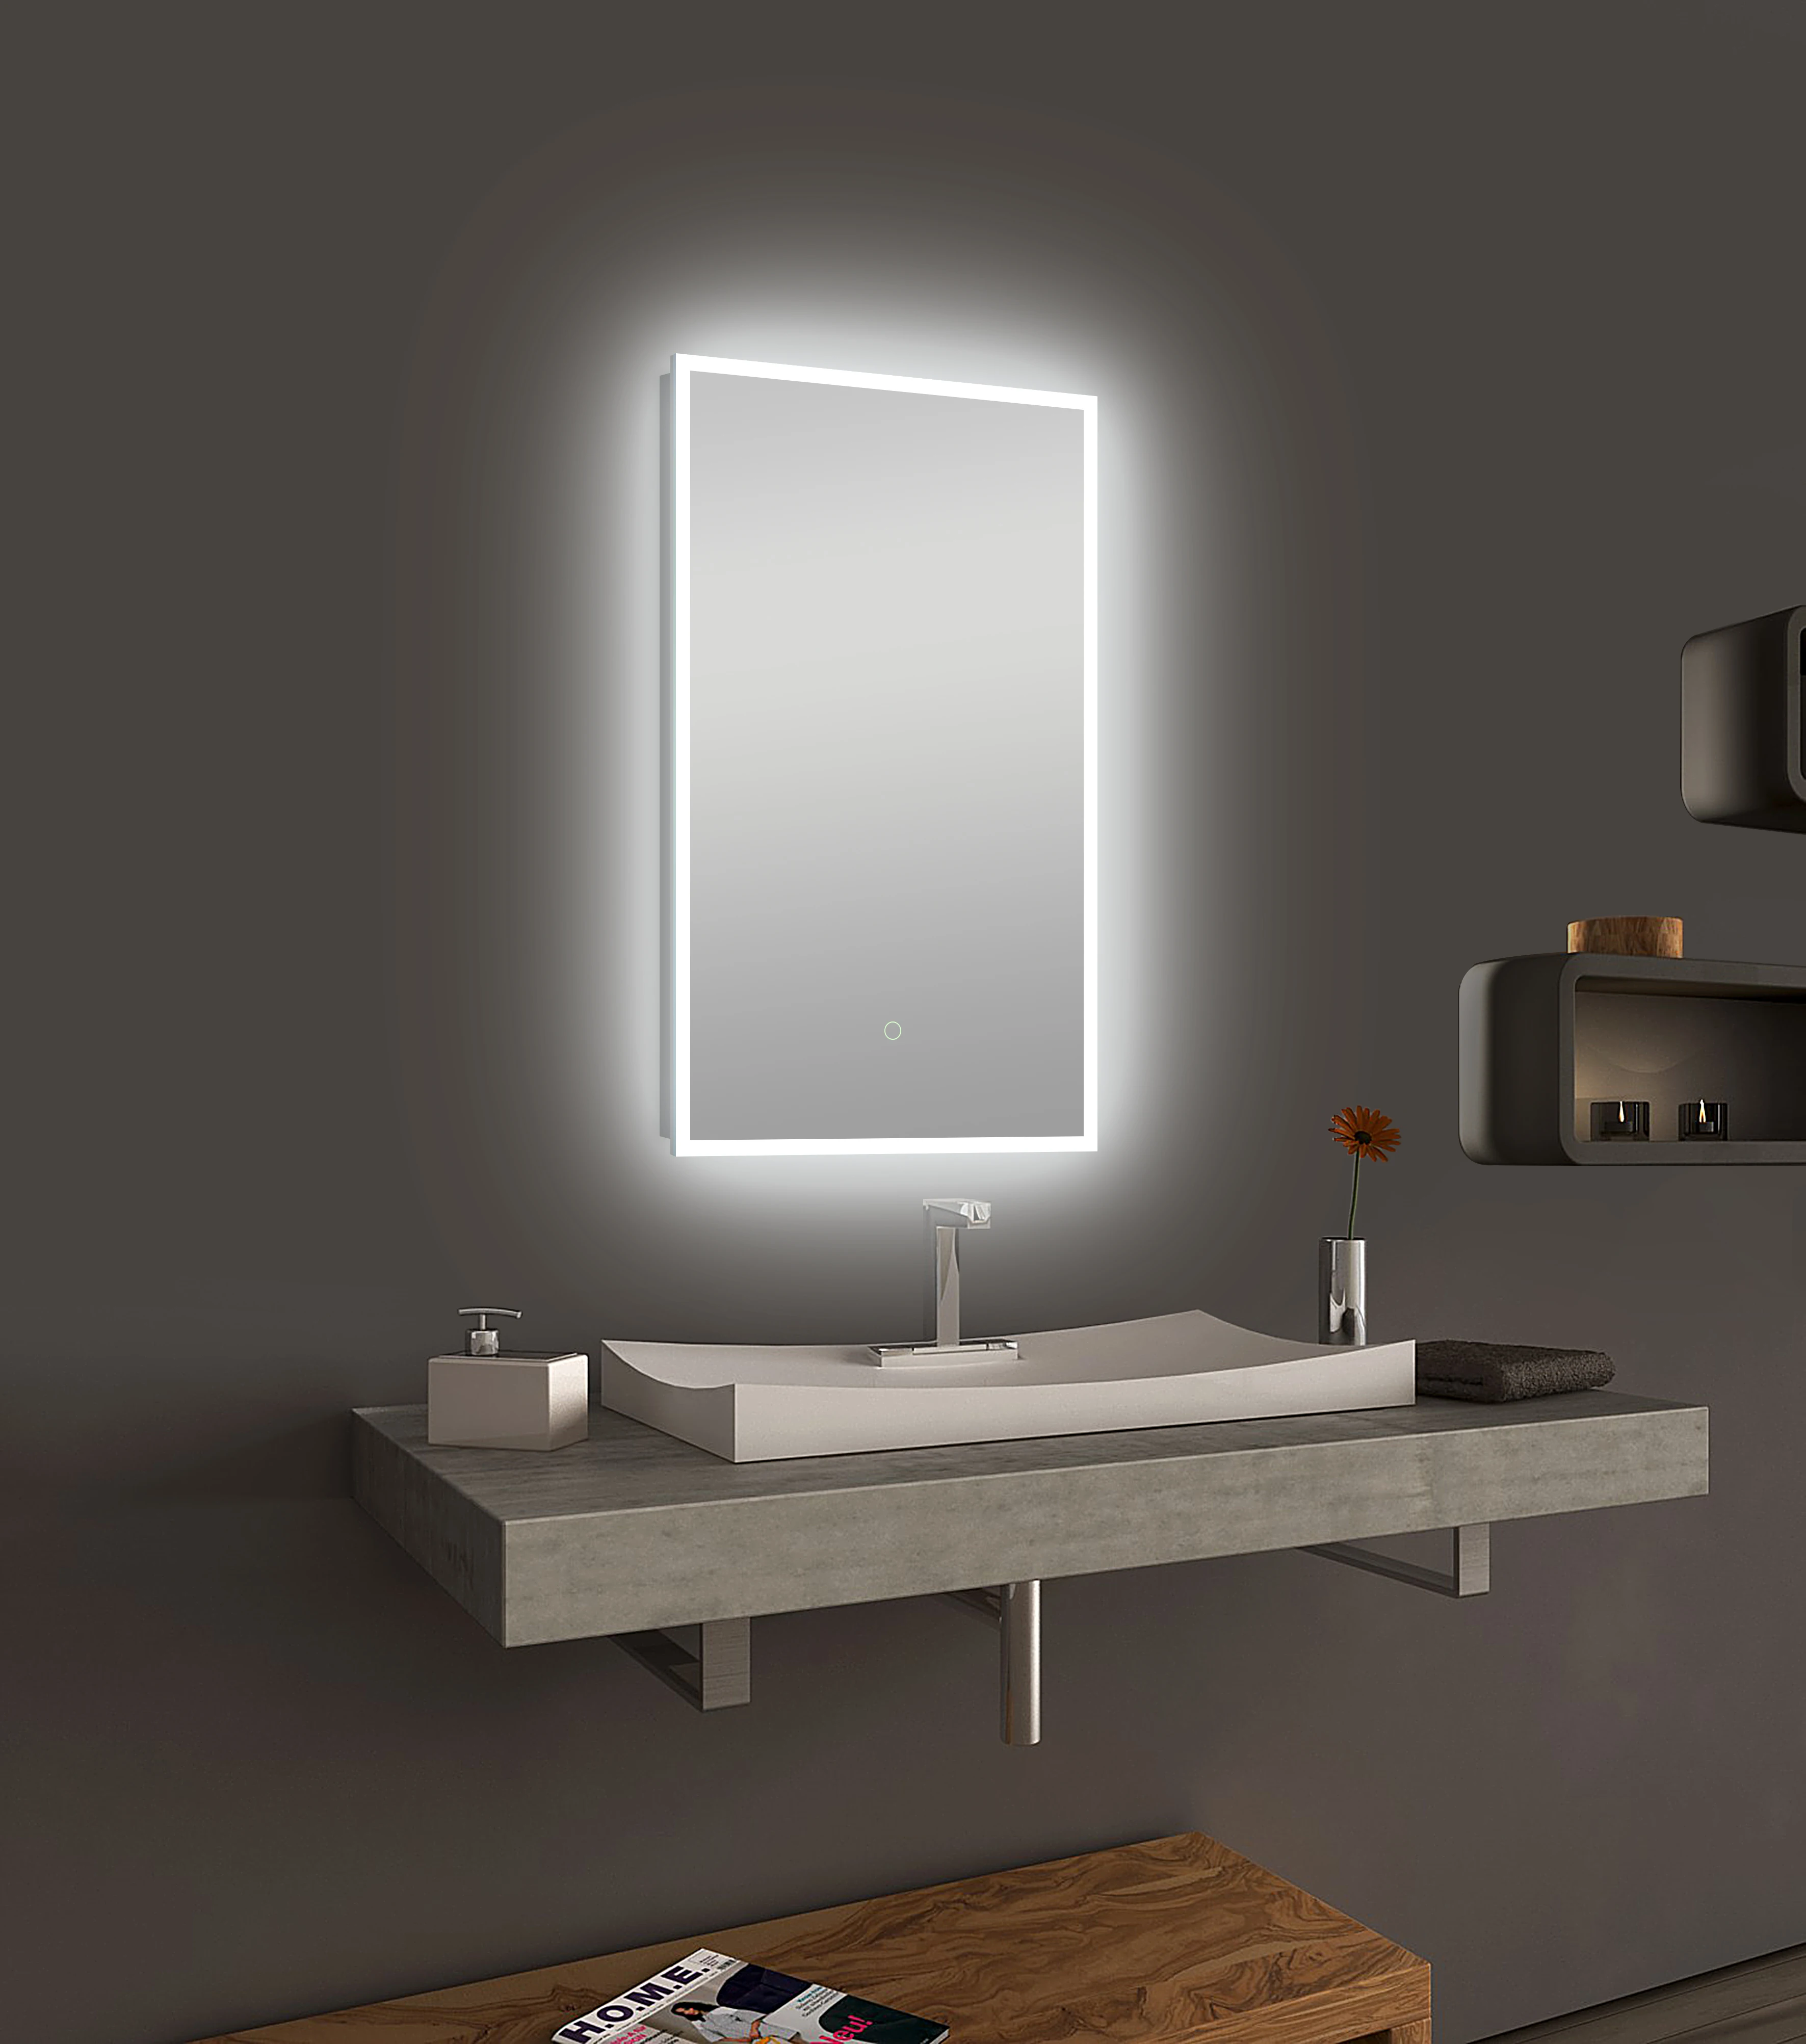 Horizontal and vertical hanging wall mounted mirrors modern bathroom furniture rectangle shaped LED smart mirror